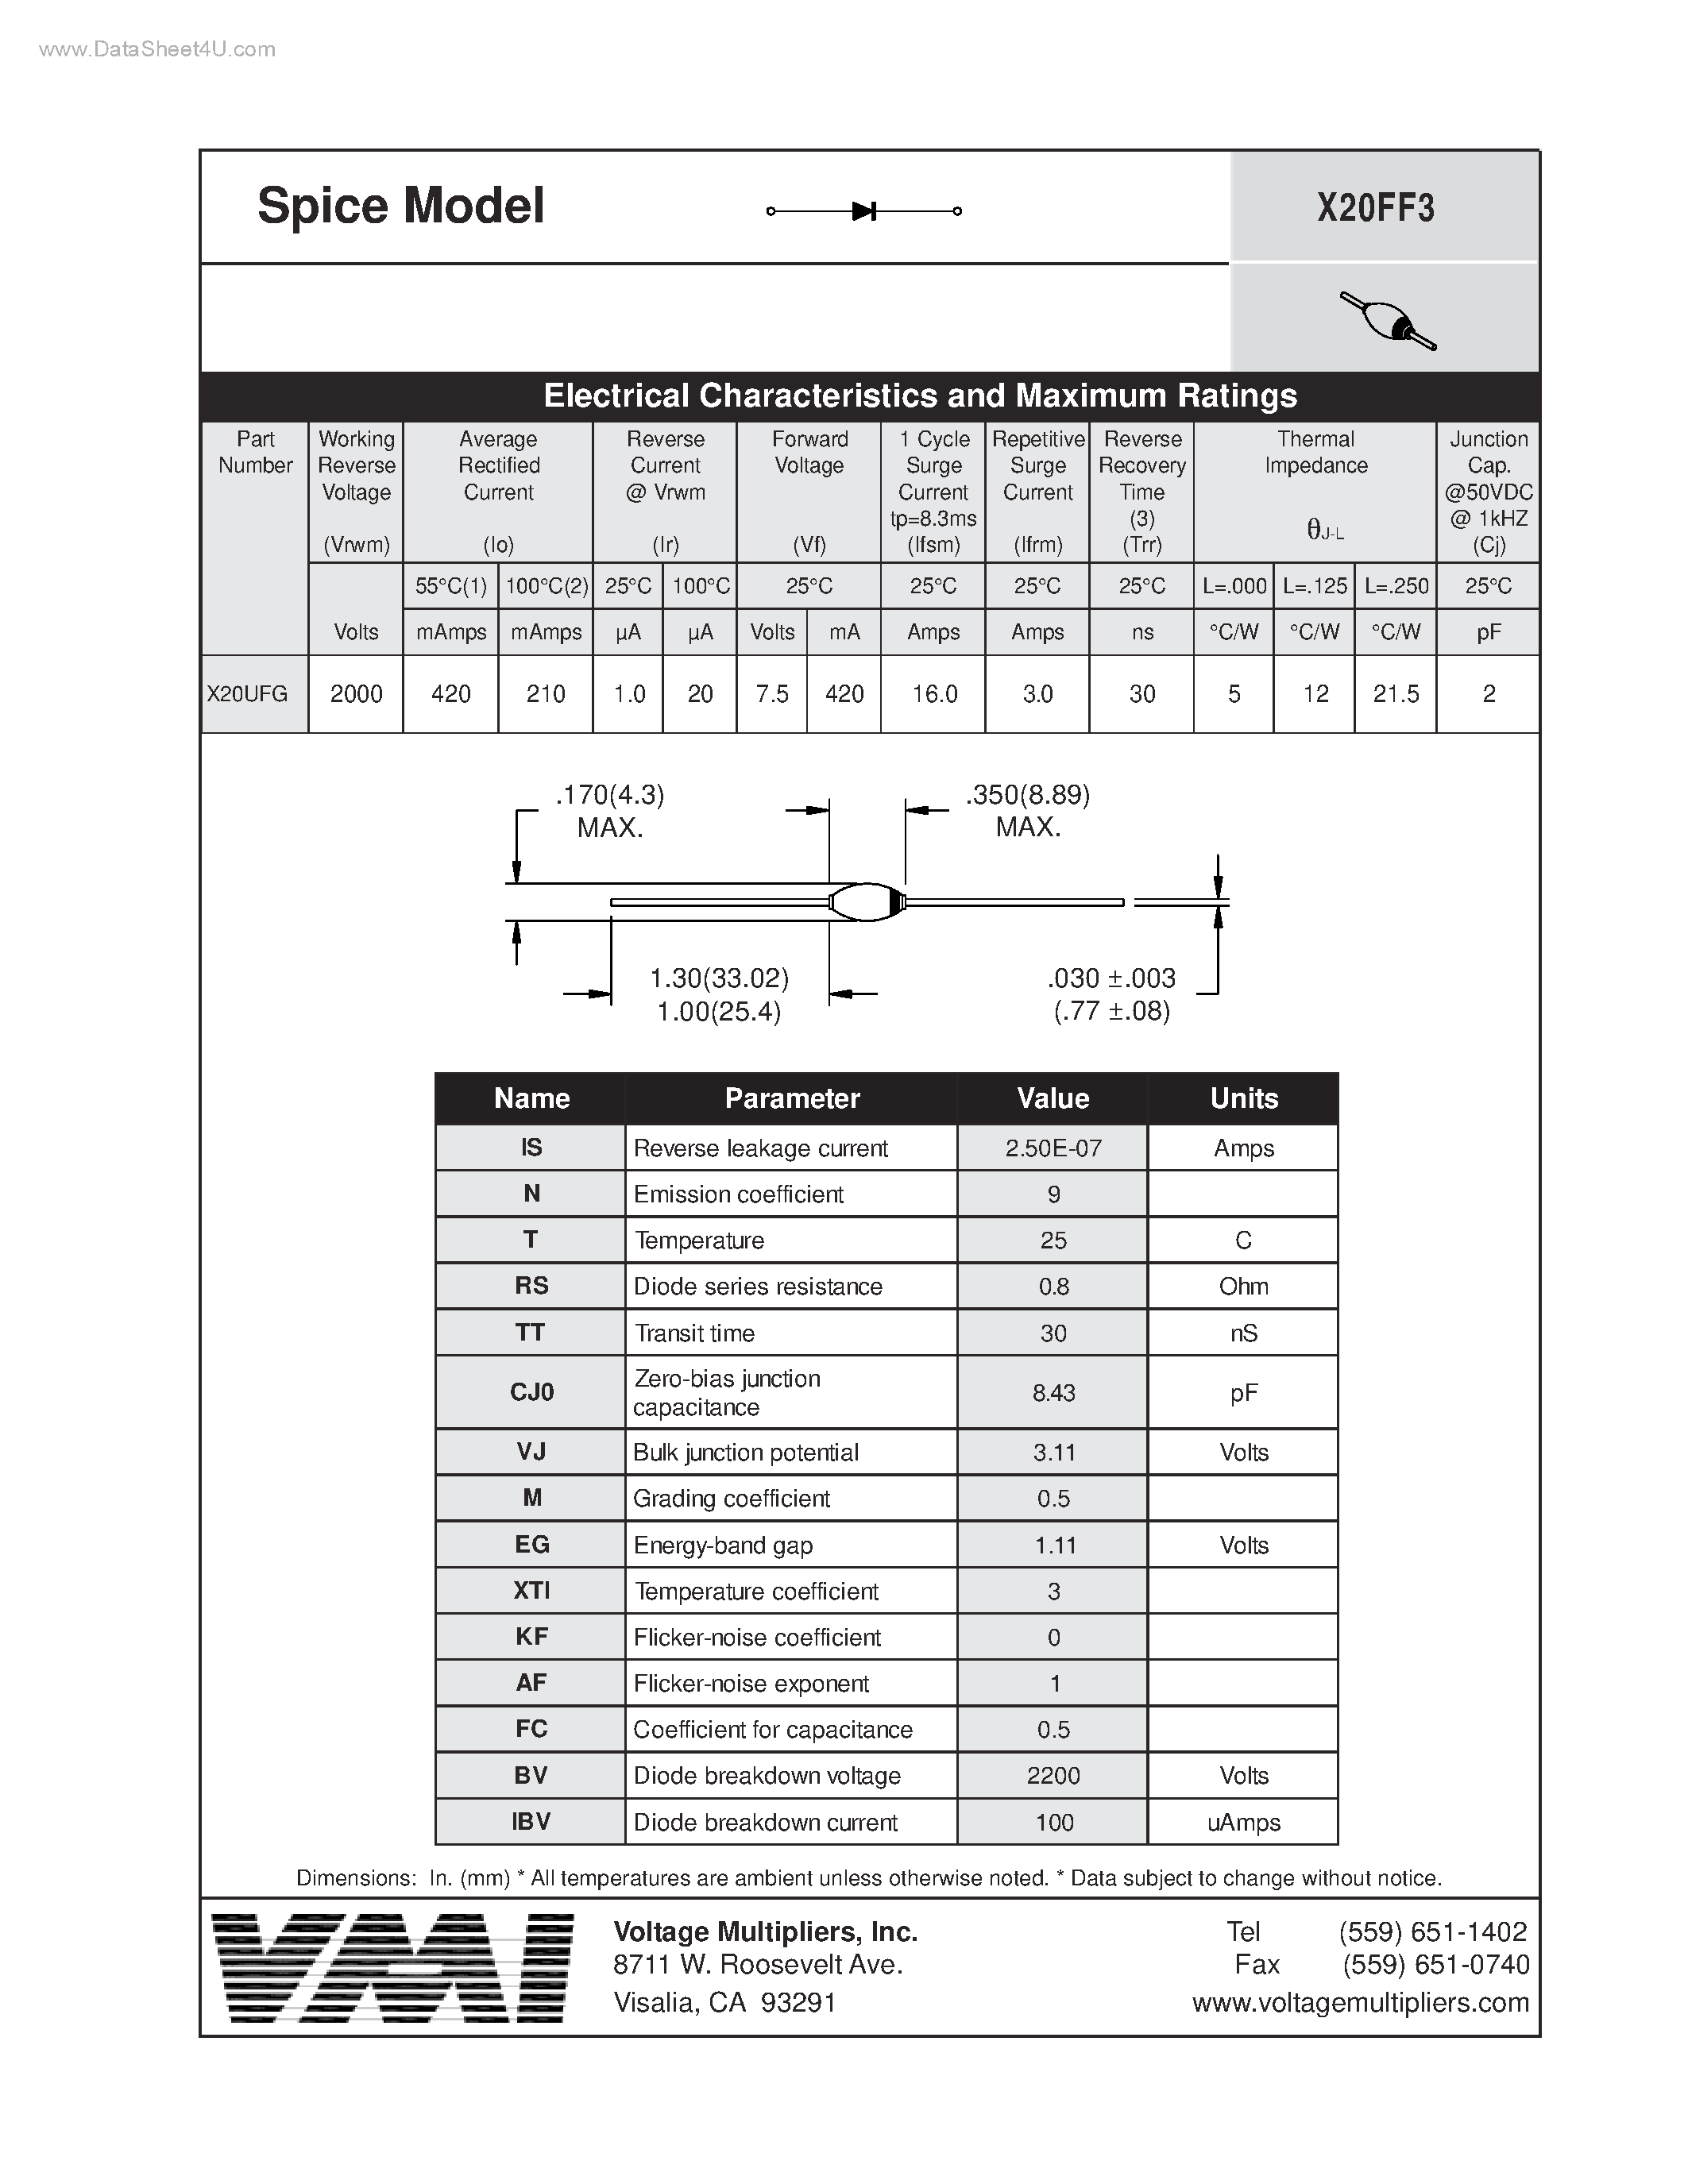 Datasheet X20FF3 - Spice Model page 1